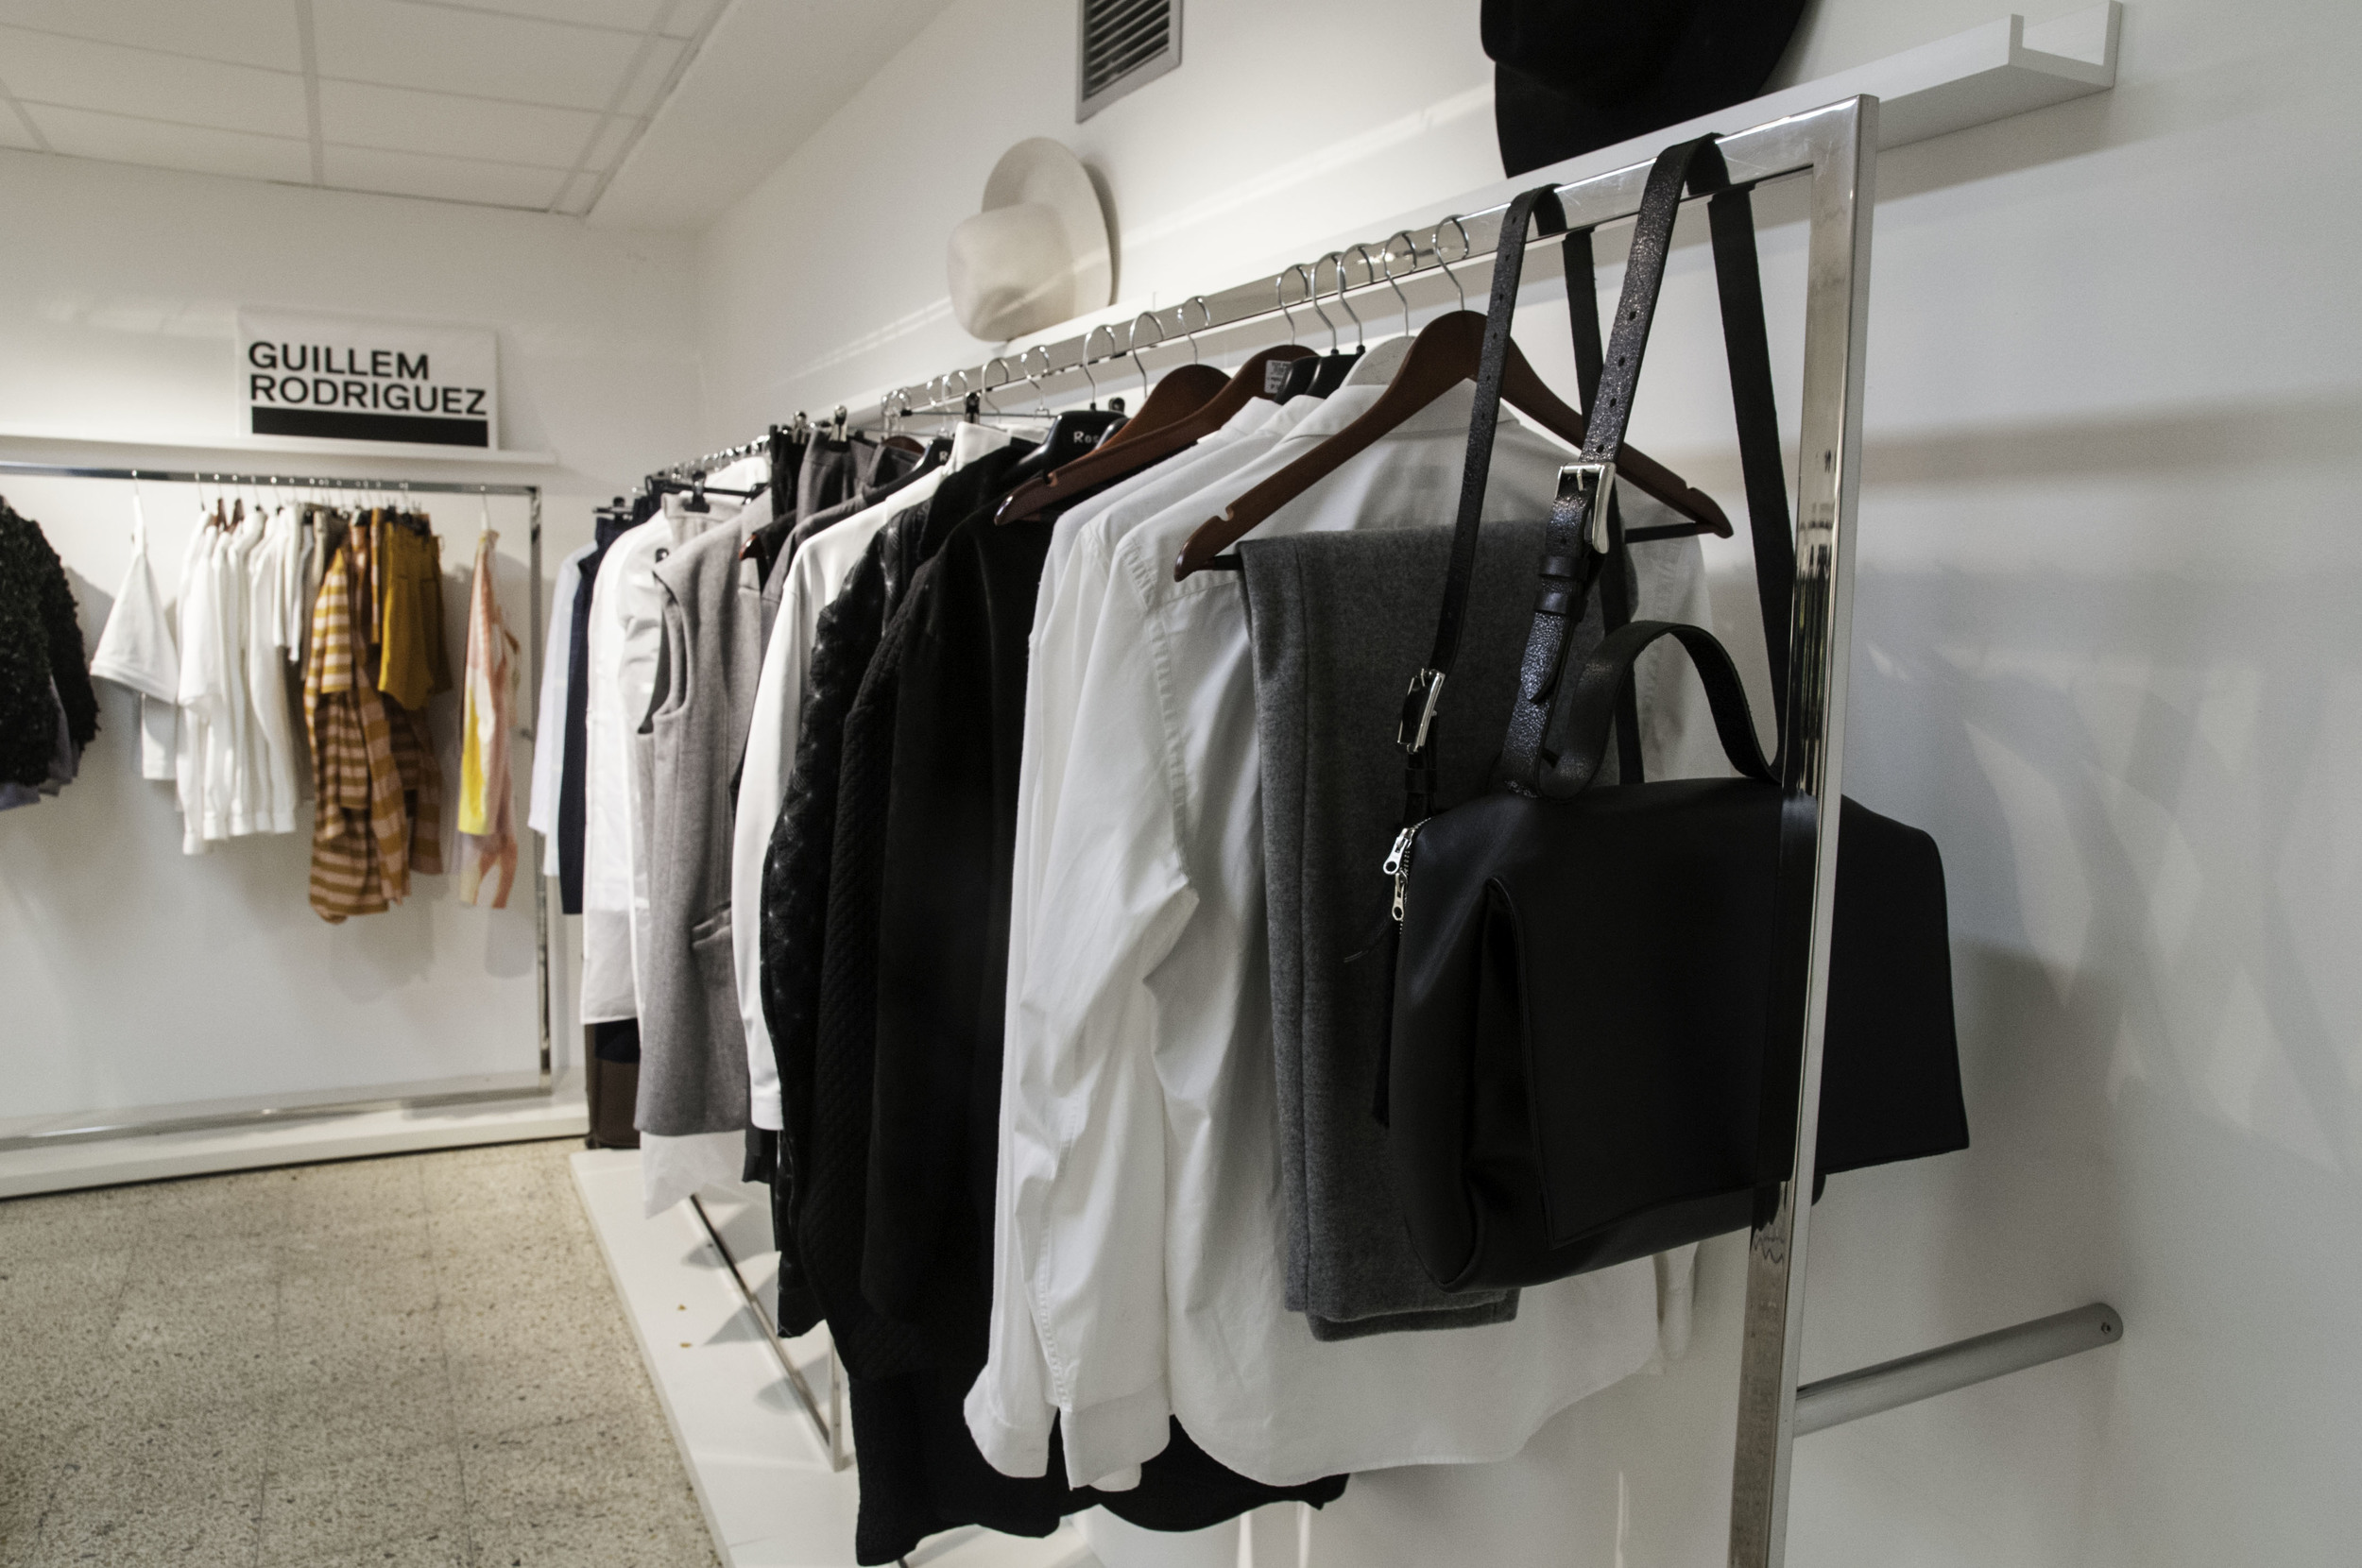  Private showroom is perfect for meeting with buyers or press 